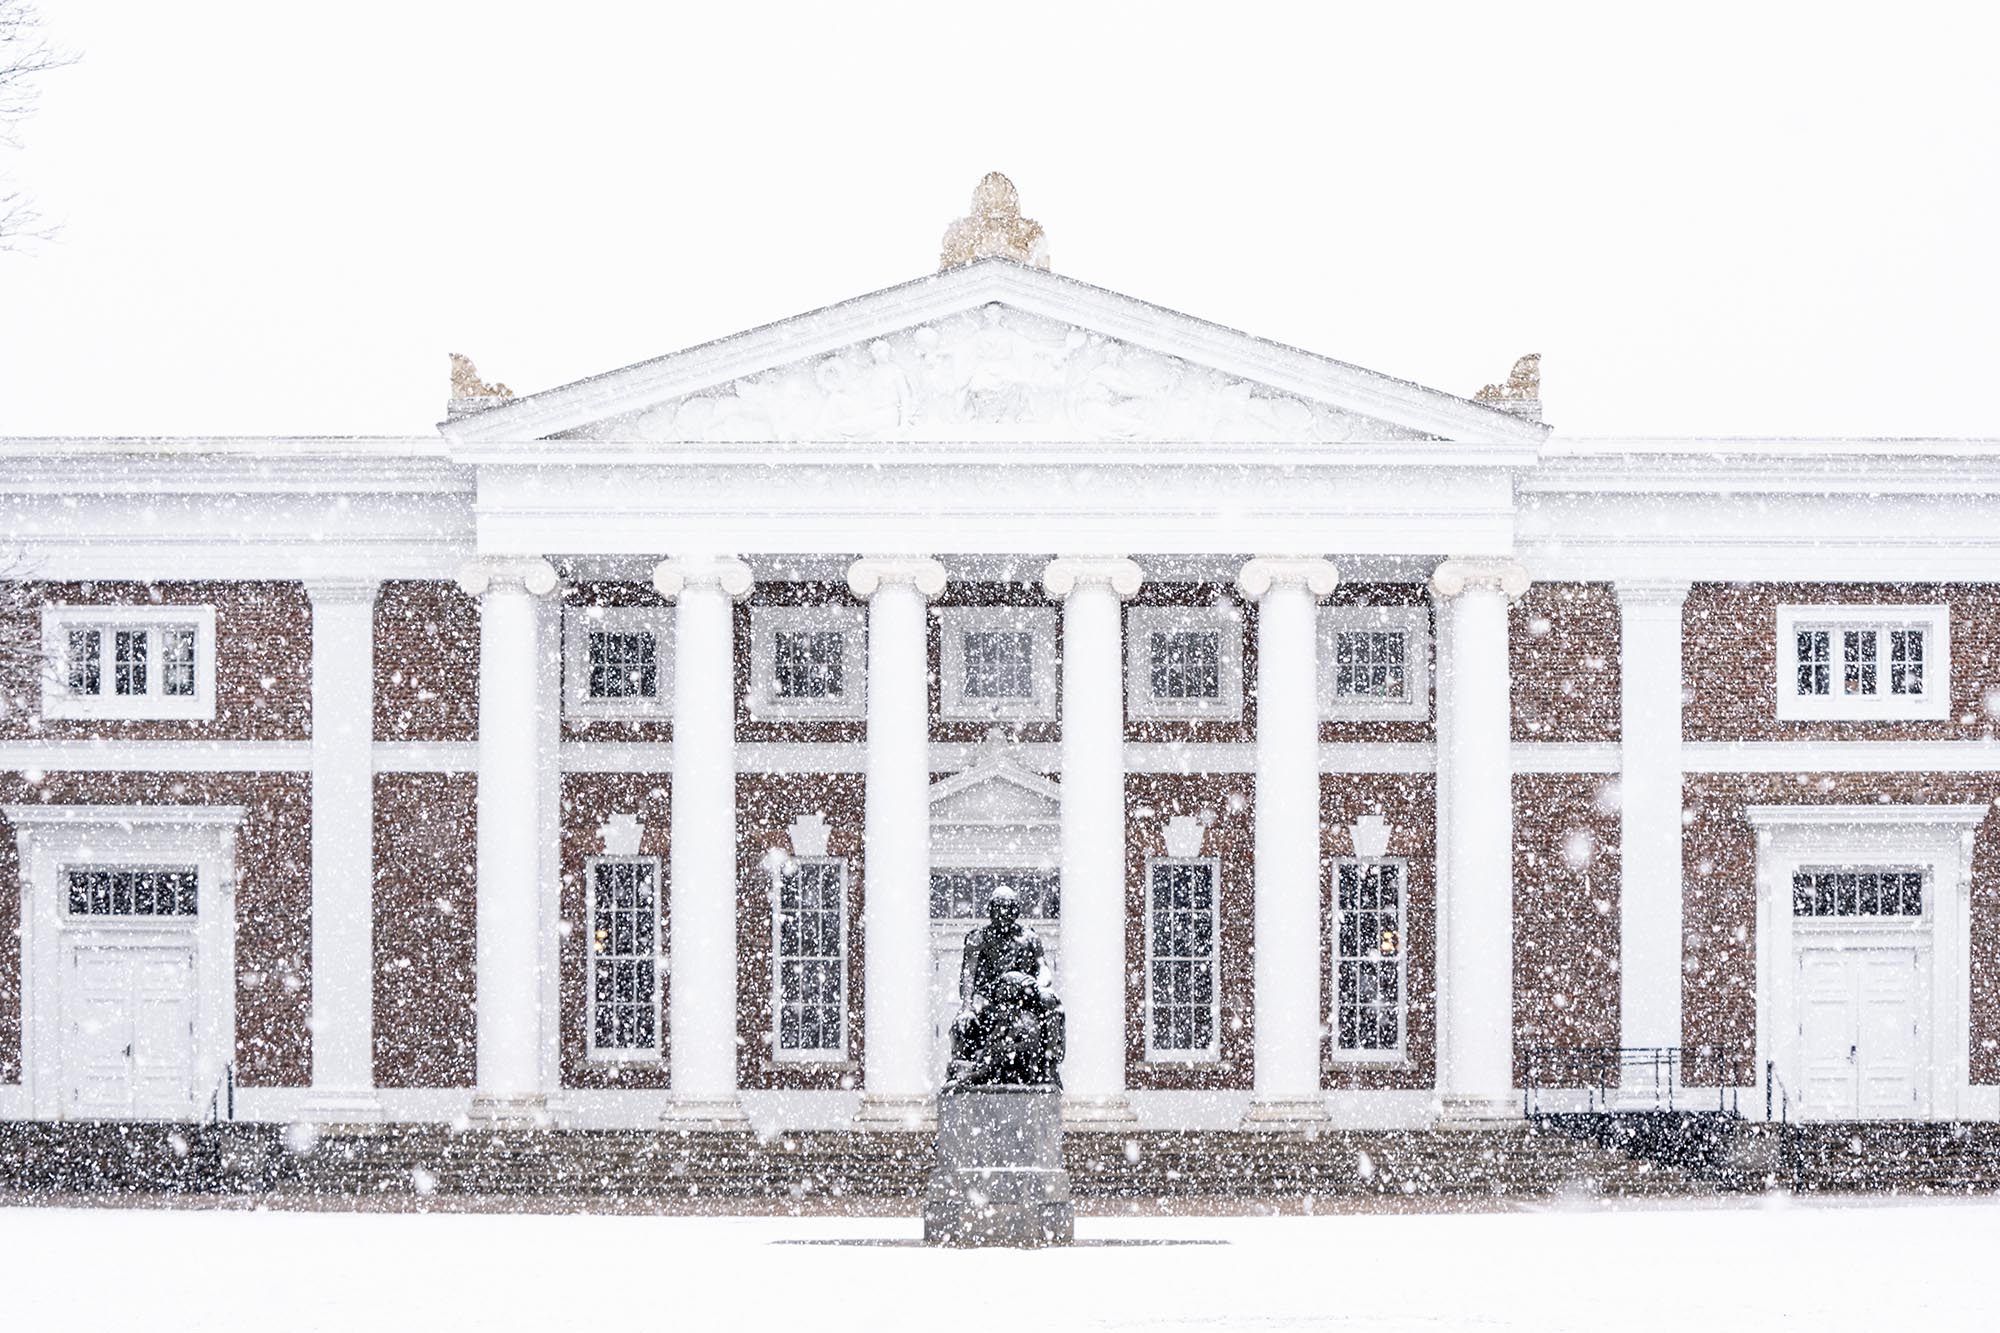 UVA Building while it is snowing